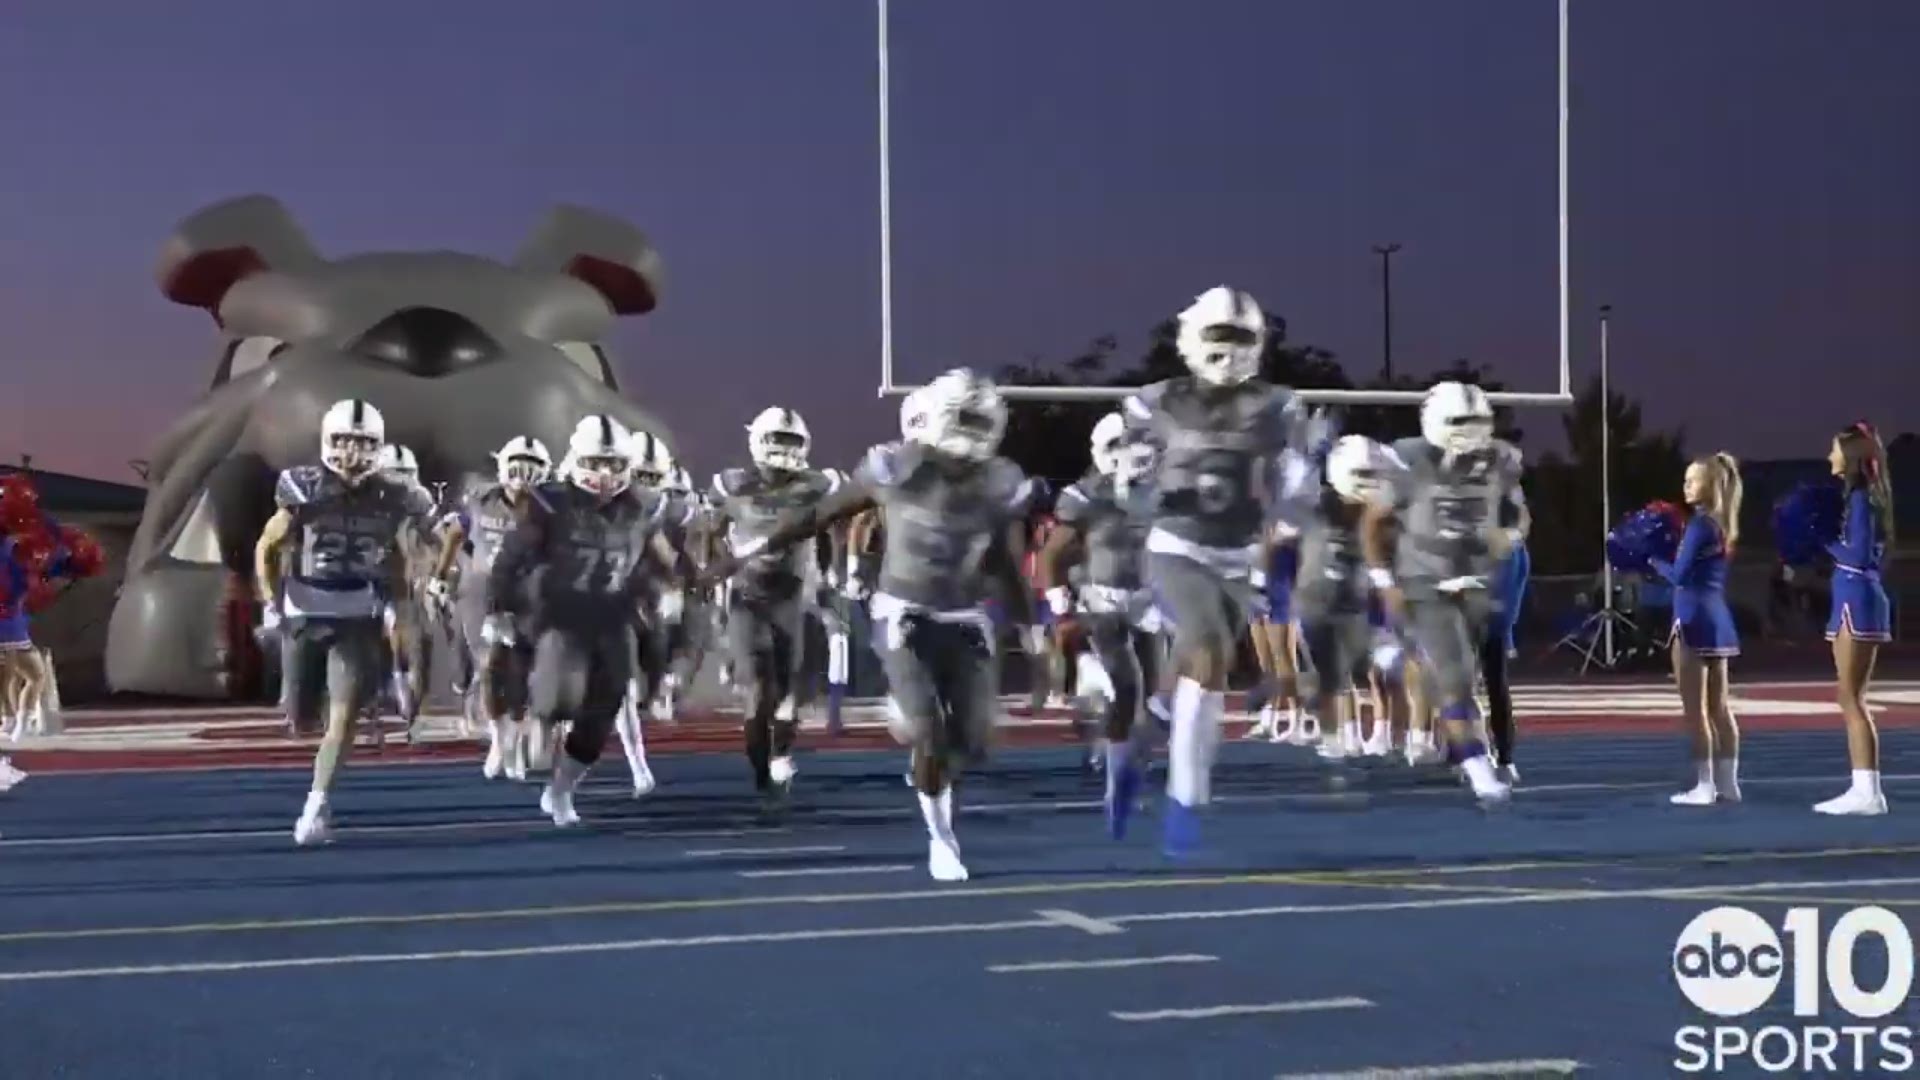 The folsom bulldogs survived an early scare from the Rocklin Thunder, but cruise to a 42-20 victory on Friday night, improving to 5-1 on the season.